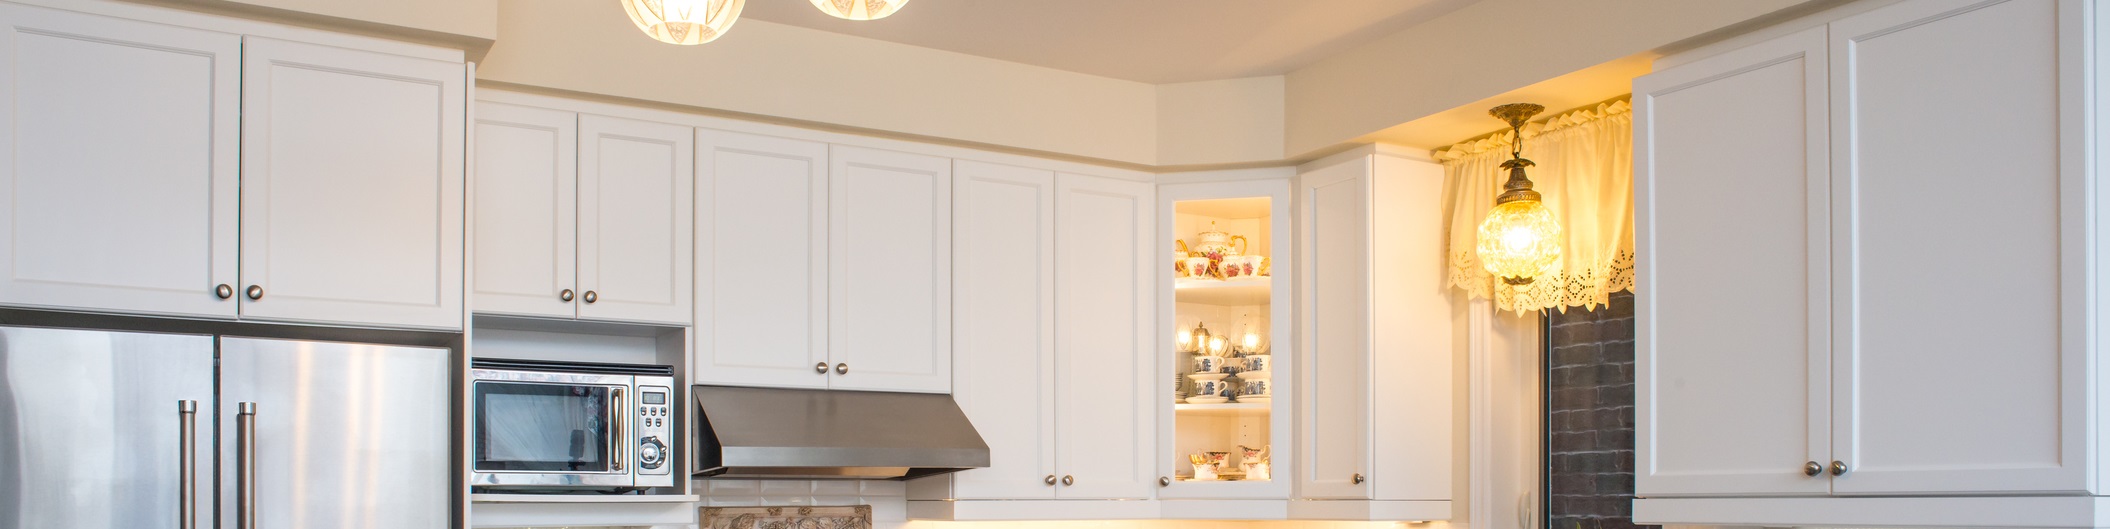 Cabinet Painting Contractor Denver